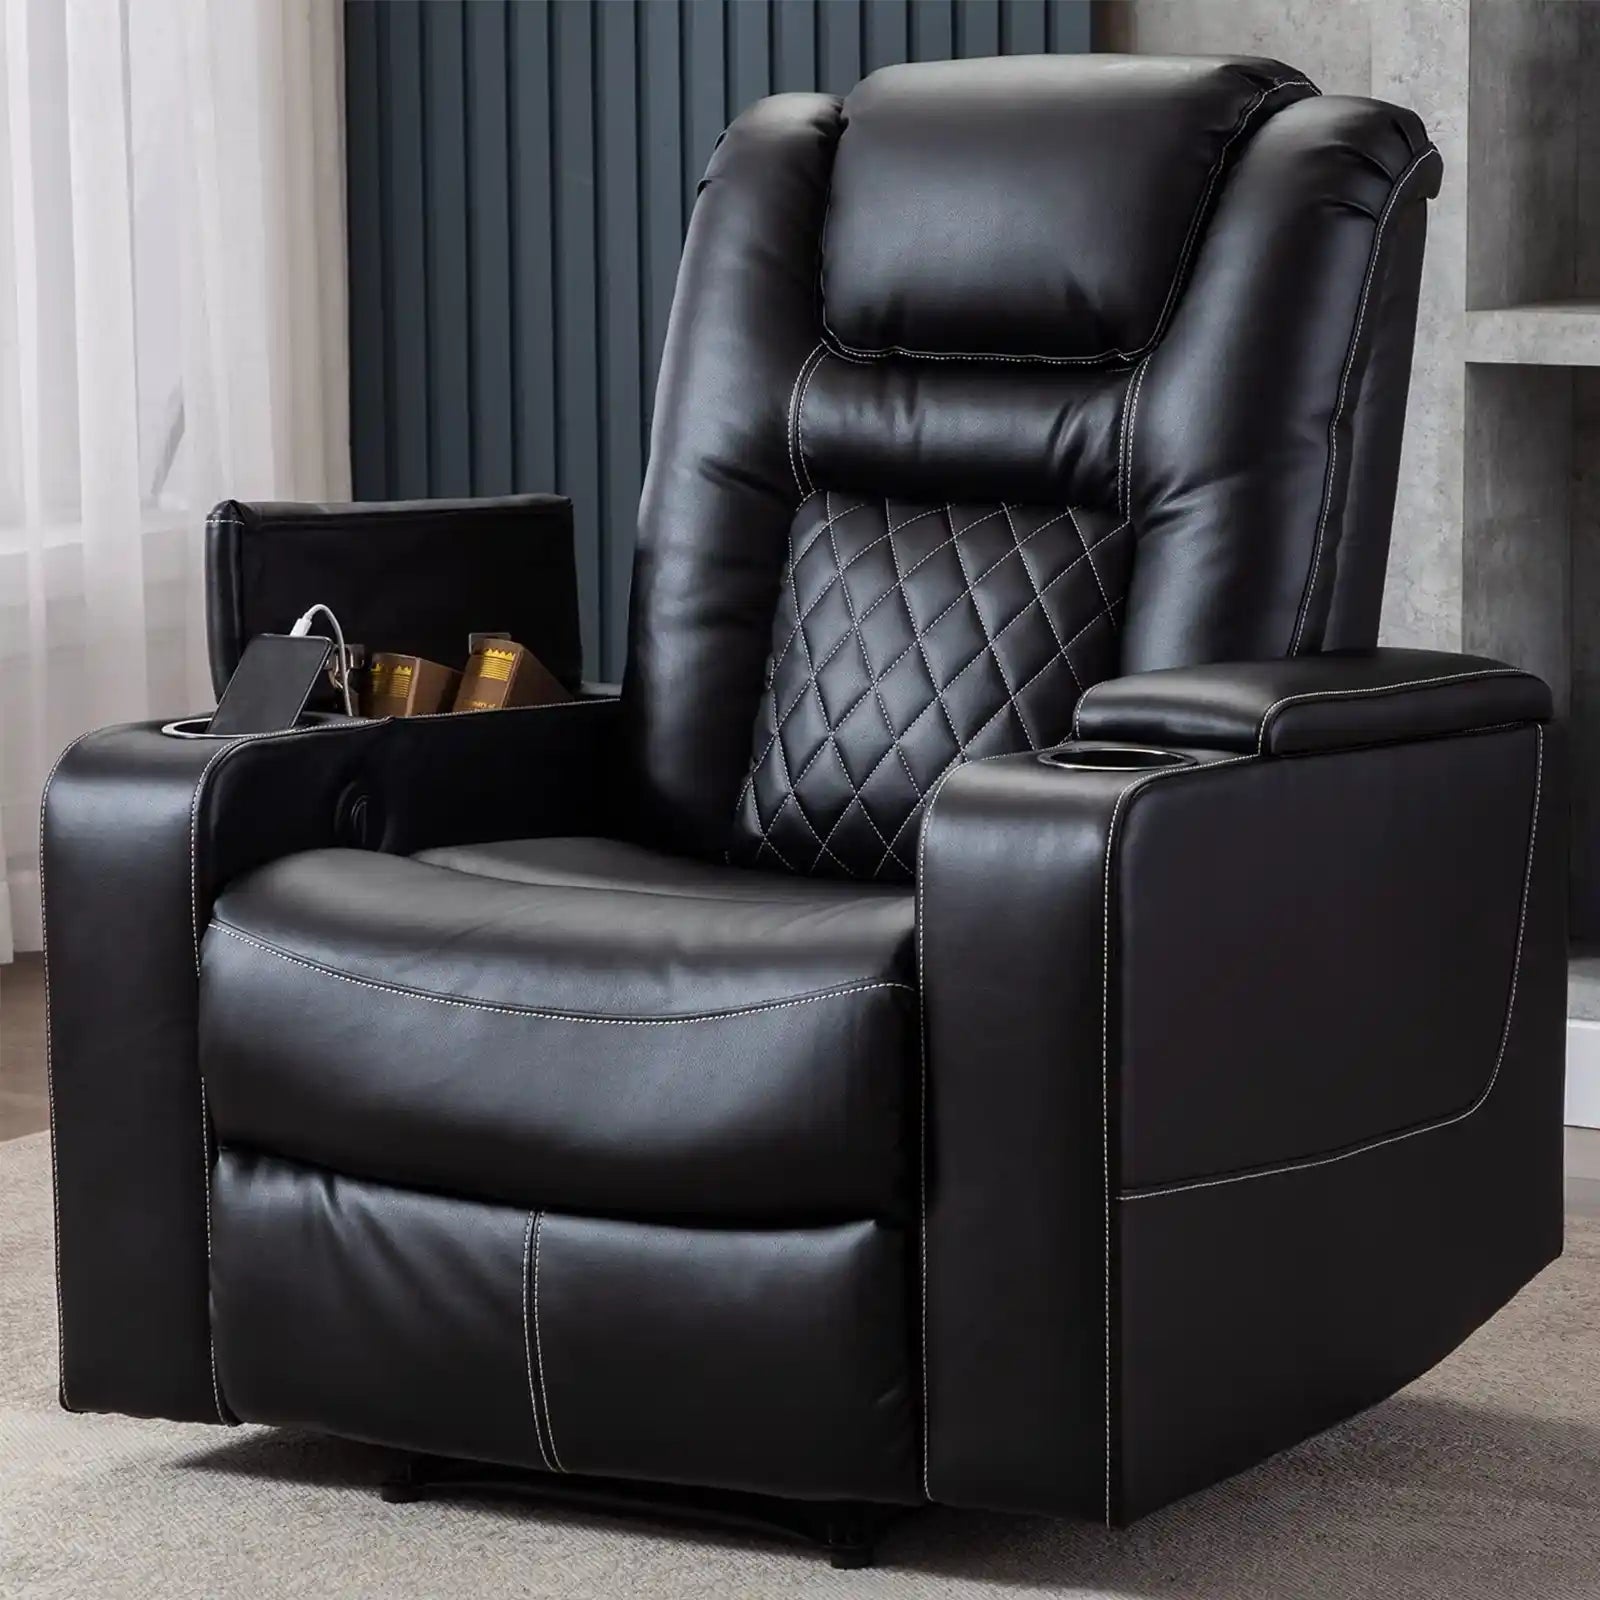 Electric Power Recliner Chair with USB Ports and Cup Holders, Breathable Leather